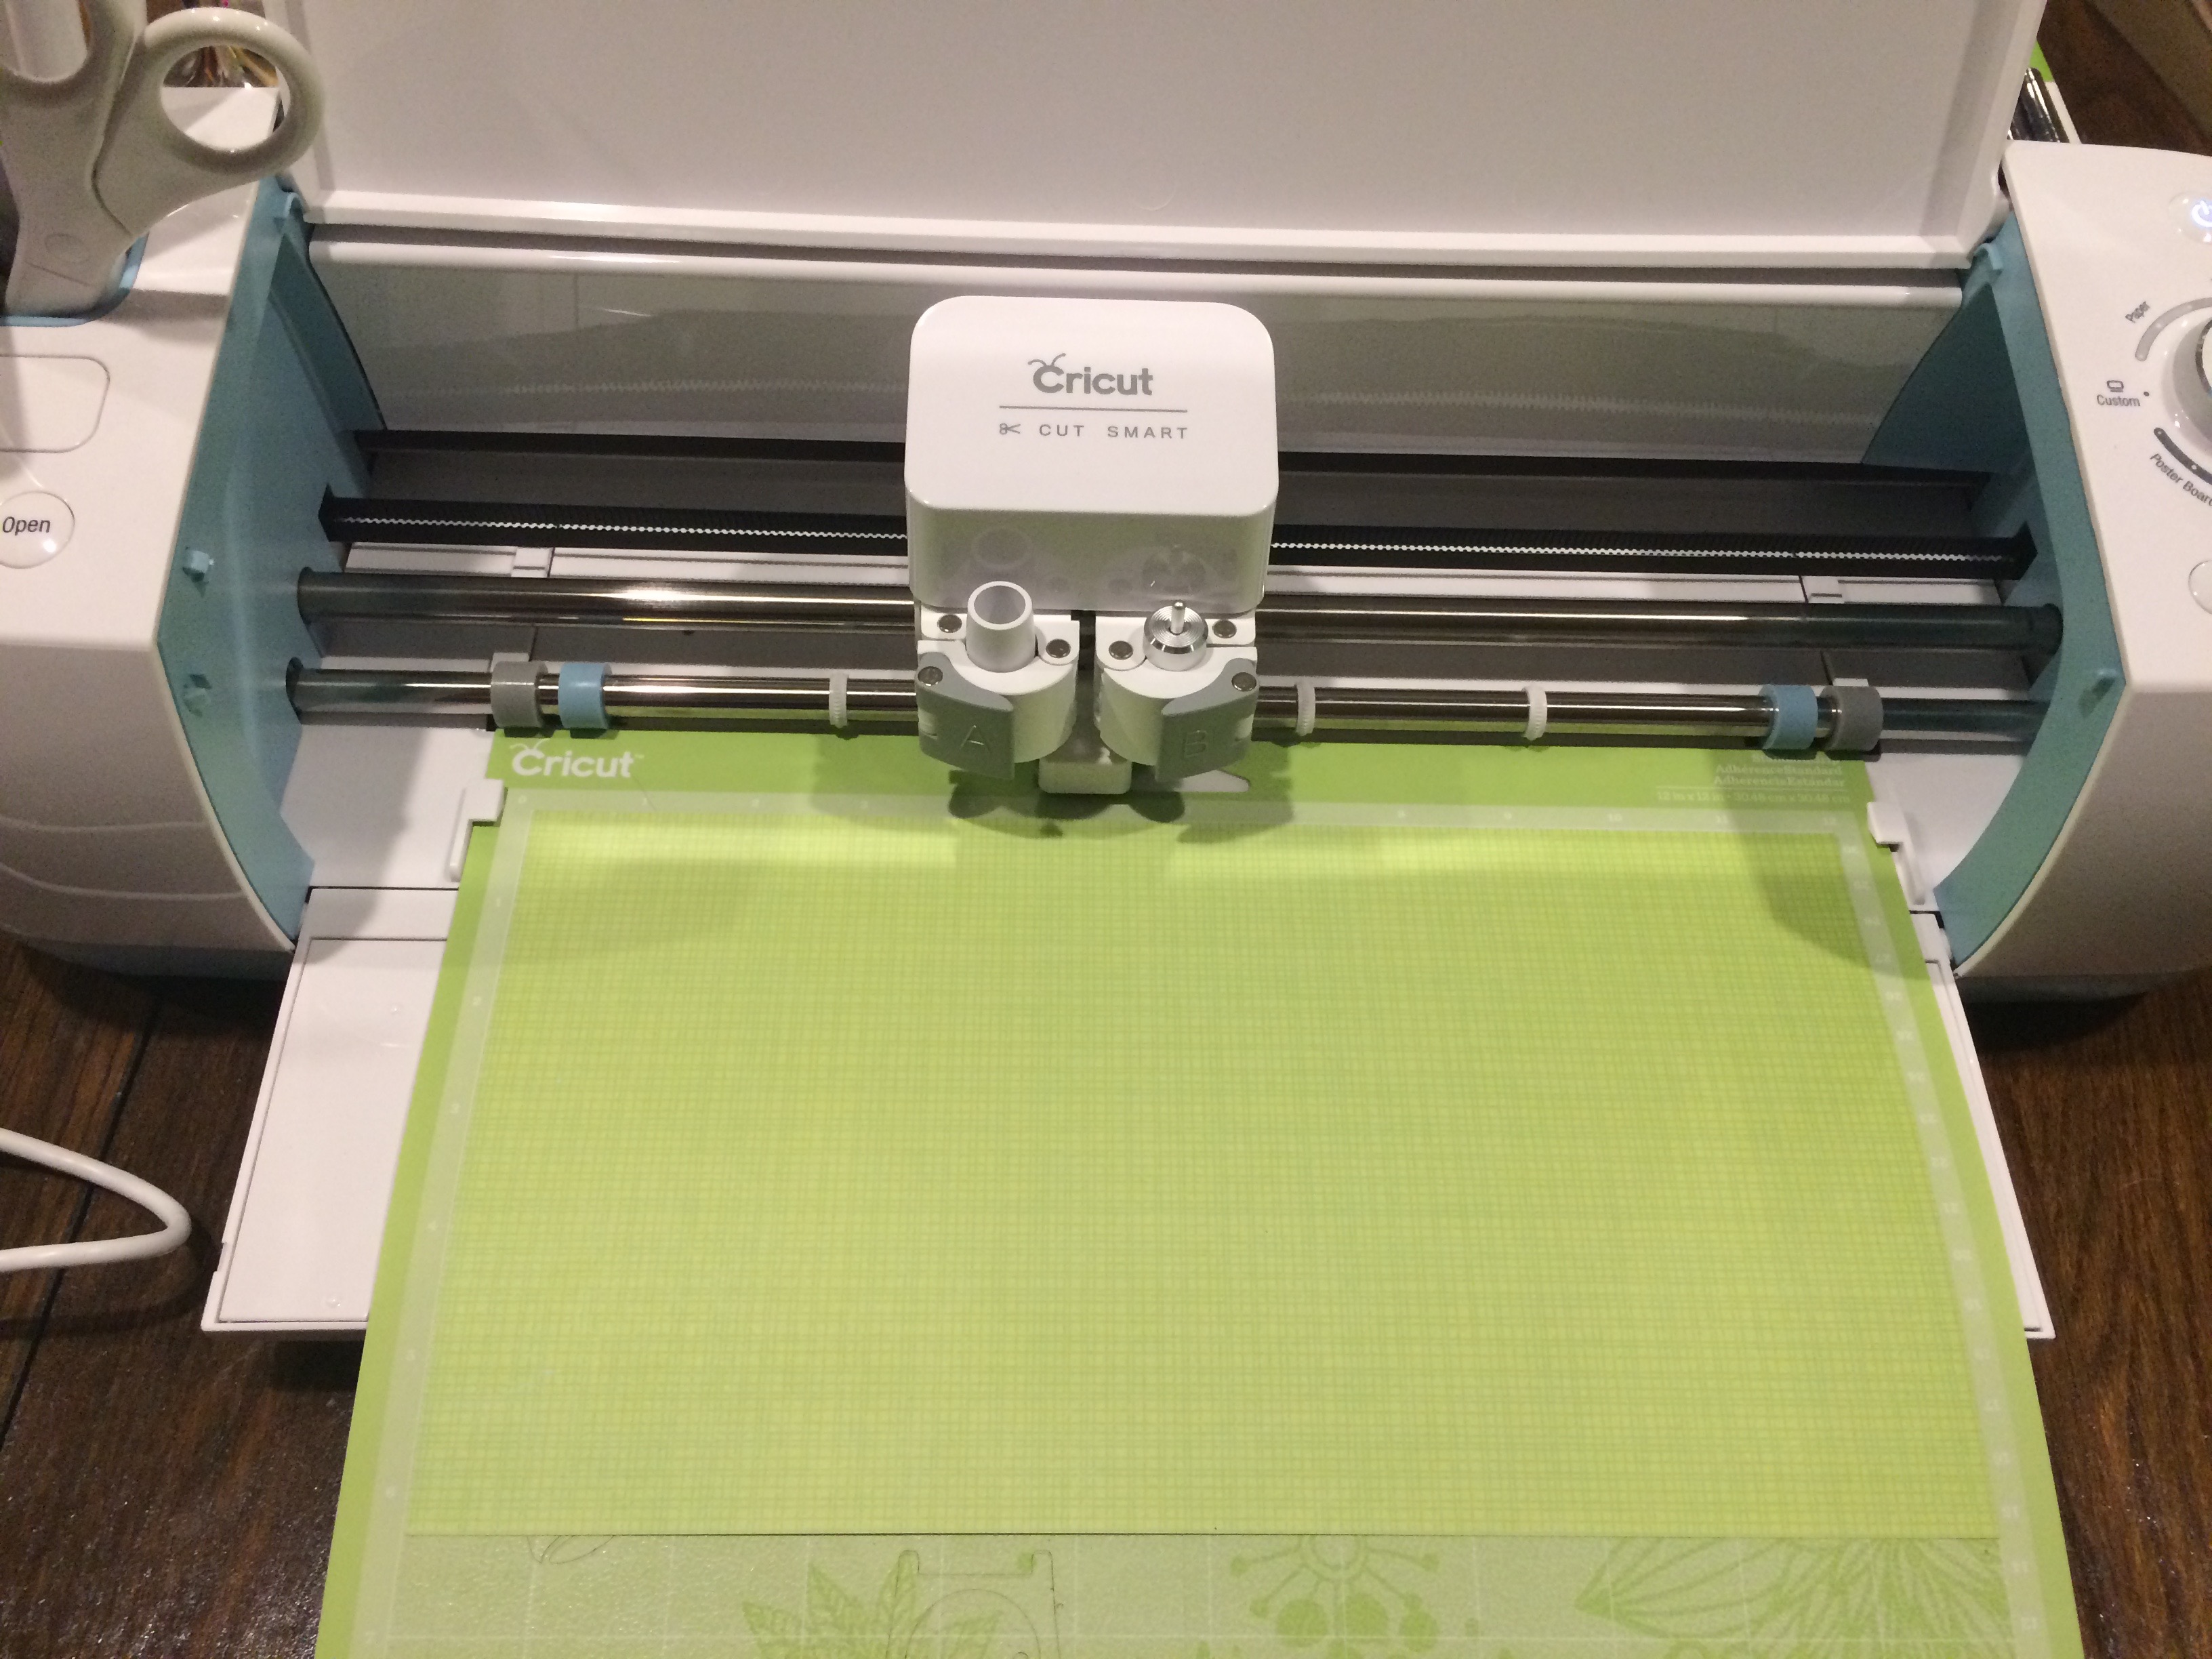 Using a Cricut Explore to craft DIY vinyl projects and homemade cards